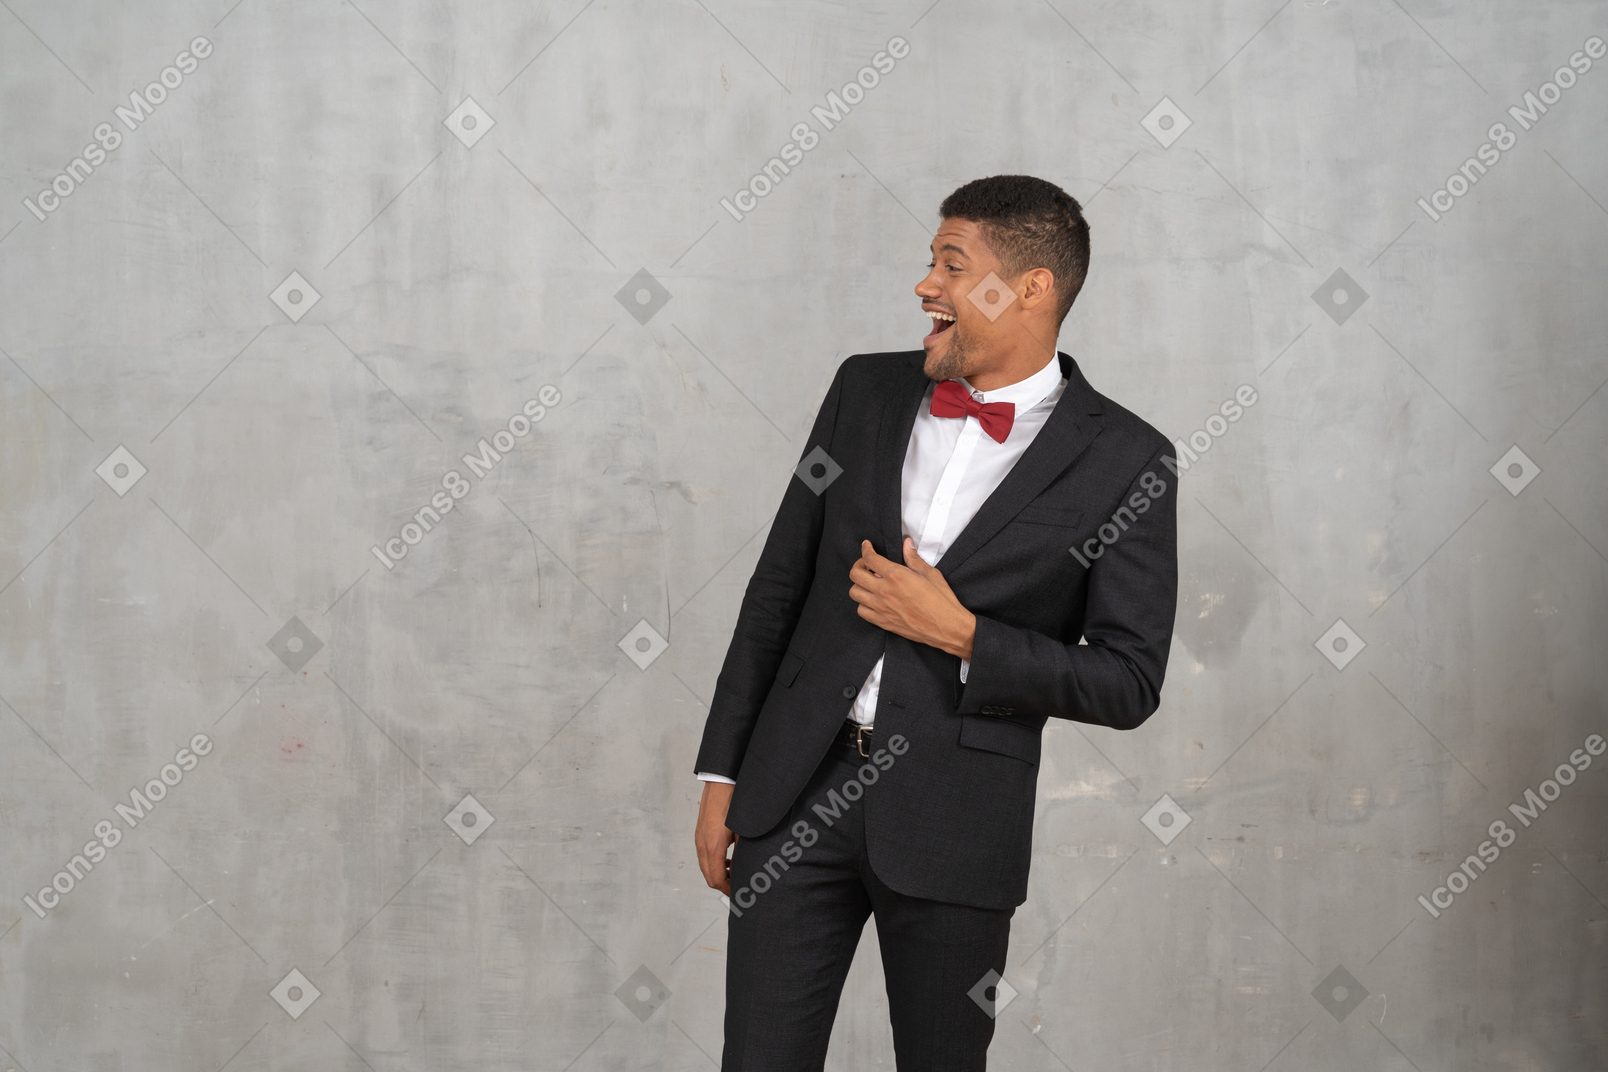 Laughing man in black suit looking to his right